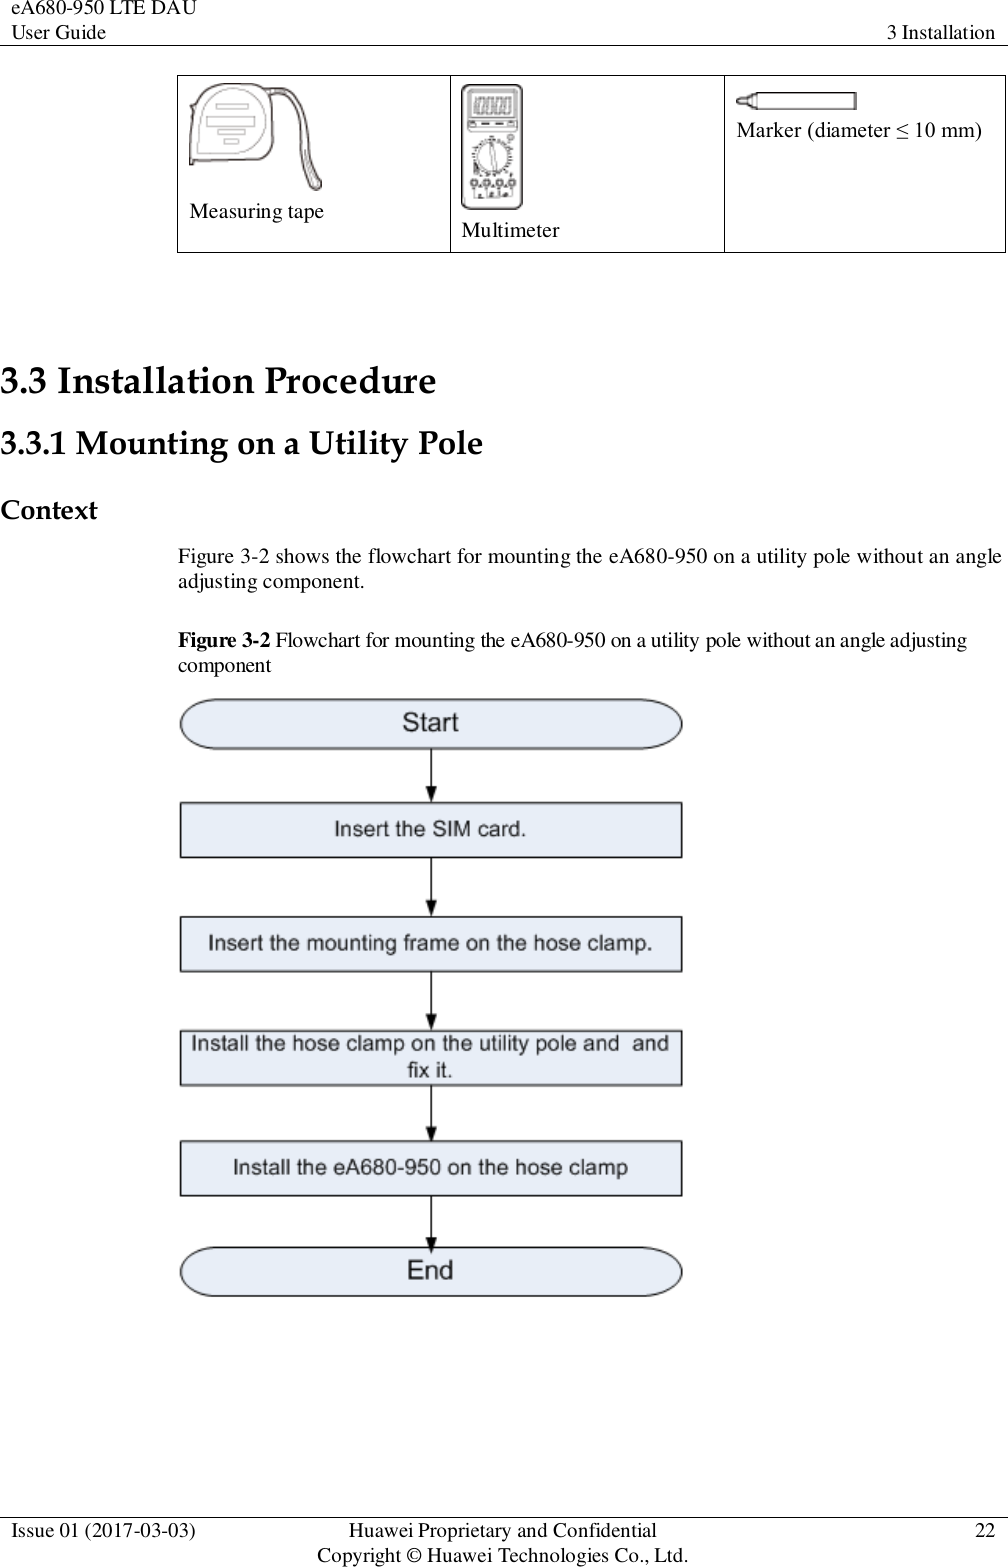 eA680-950 LTE DAU User Guide 3 Installation  Issue 01 (2017-03-03) Huawei Proprietary and Confidential                                     Copyright © Huawei Technologies Co., Ltd. 22   Measuring tape  Multimeter  Marker (diameter ≤ 10 mm)  3.3 Installation Procedure 3.3.1 Mounting on a Utility Pole   Context Figure 3-2 shows the flowchart for mounting the eA680-950 on a utility pole without an angle adjusting component. Figure 3-2 Flowchart for mounting the eA680-950 on a utility pole without an angle adjusting component   